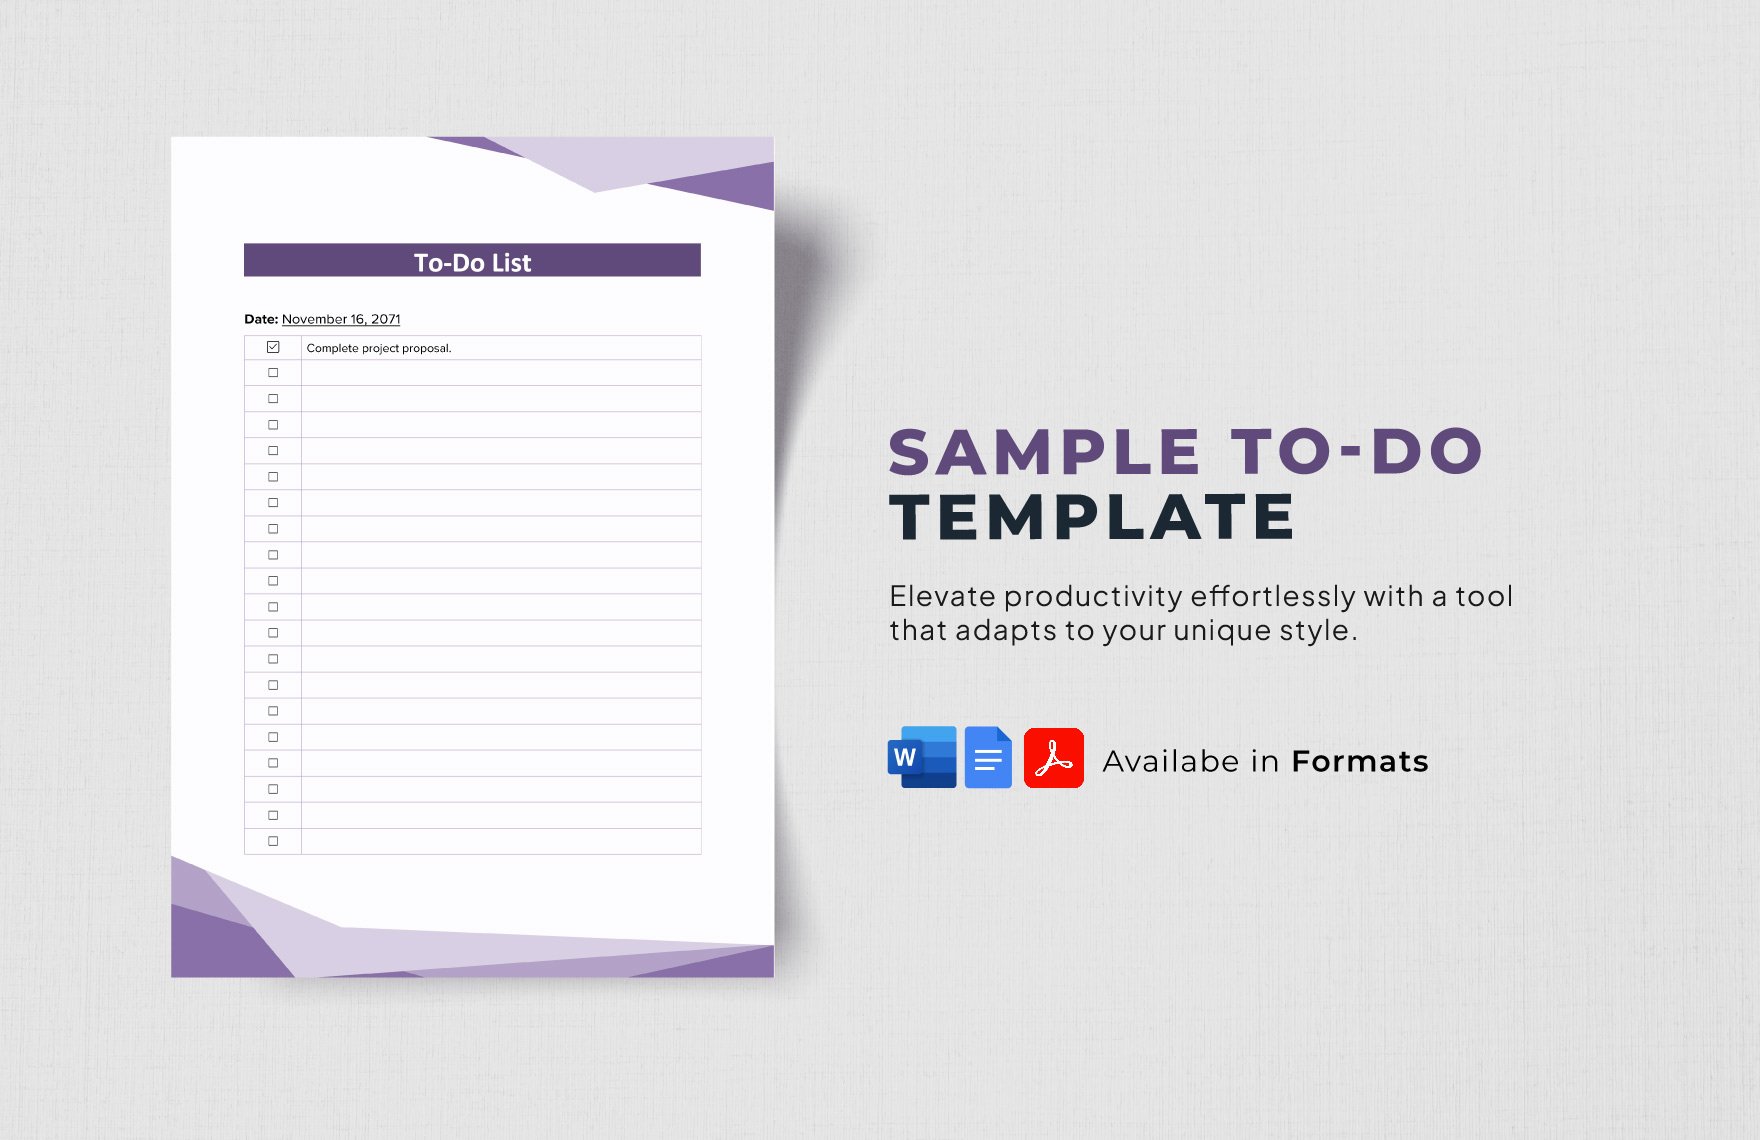 Sample To-Do Template